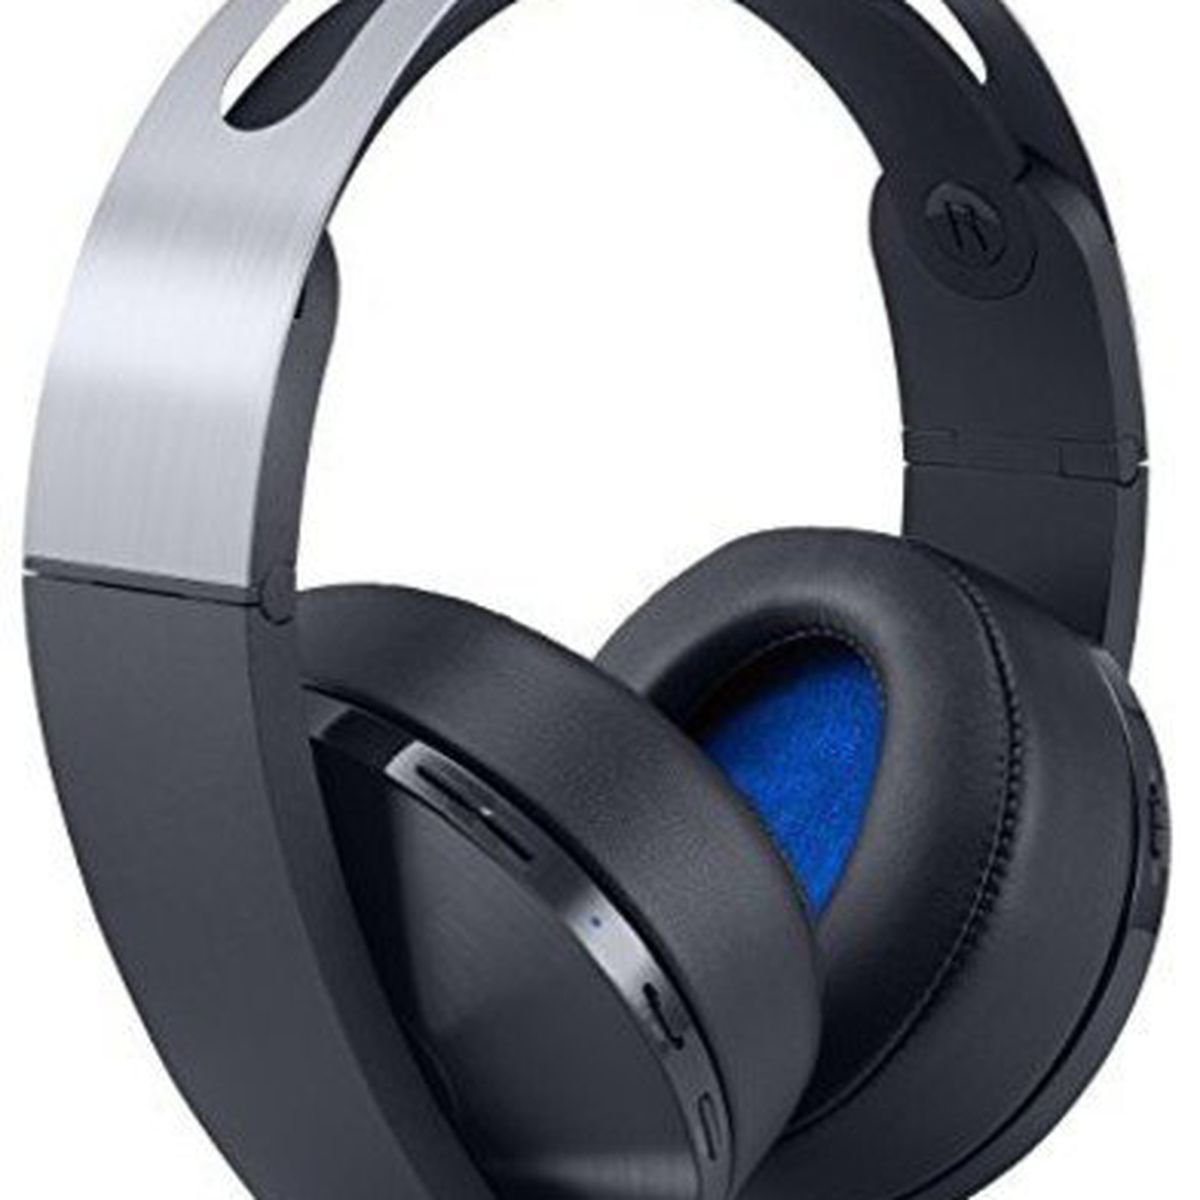 A product shot of the playstation platinum wireless headset